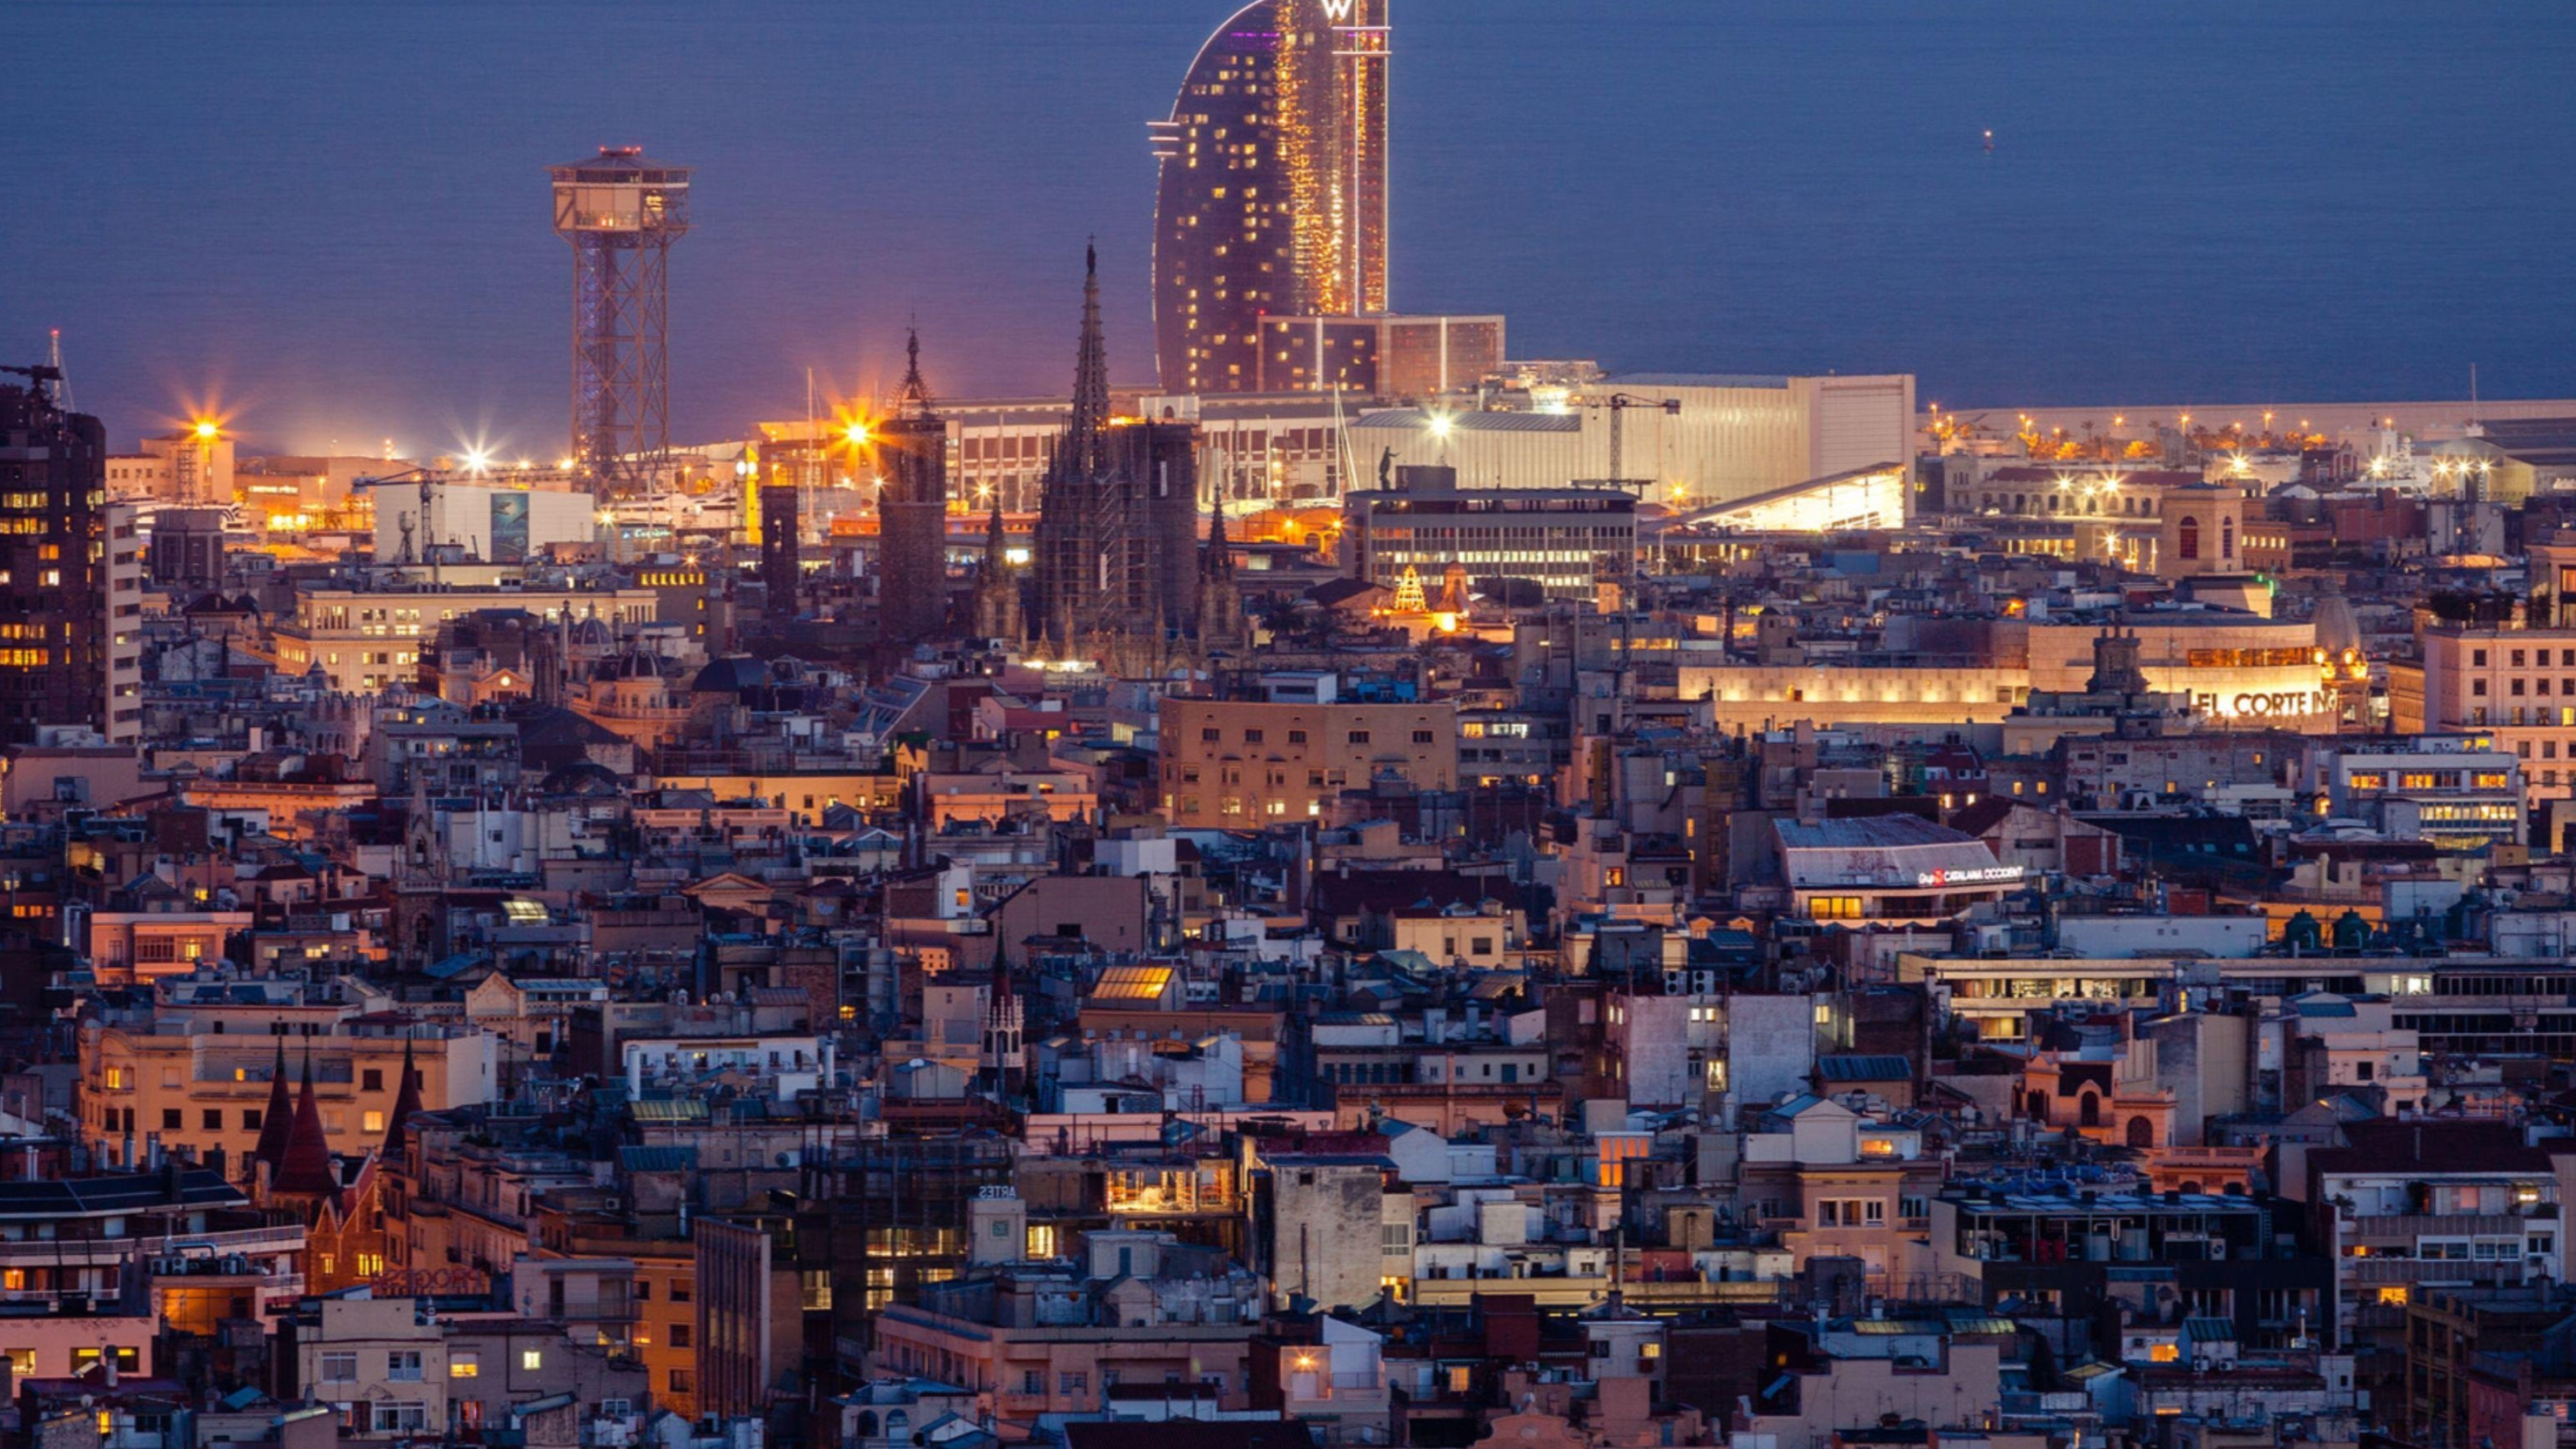 Barcelona City: The capital and largest city of the autonomous community of Catalonia. 3840x2160 4K Wallpaper.